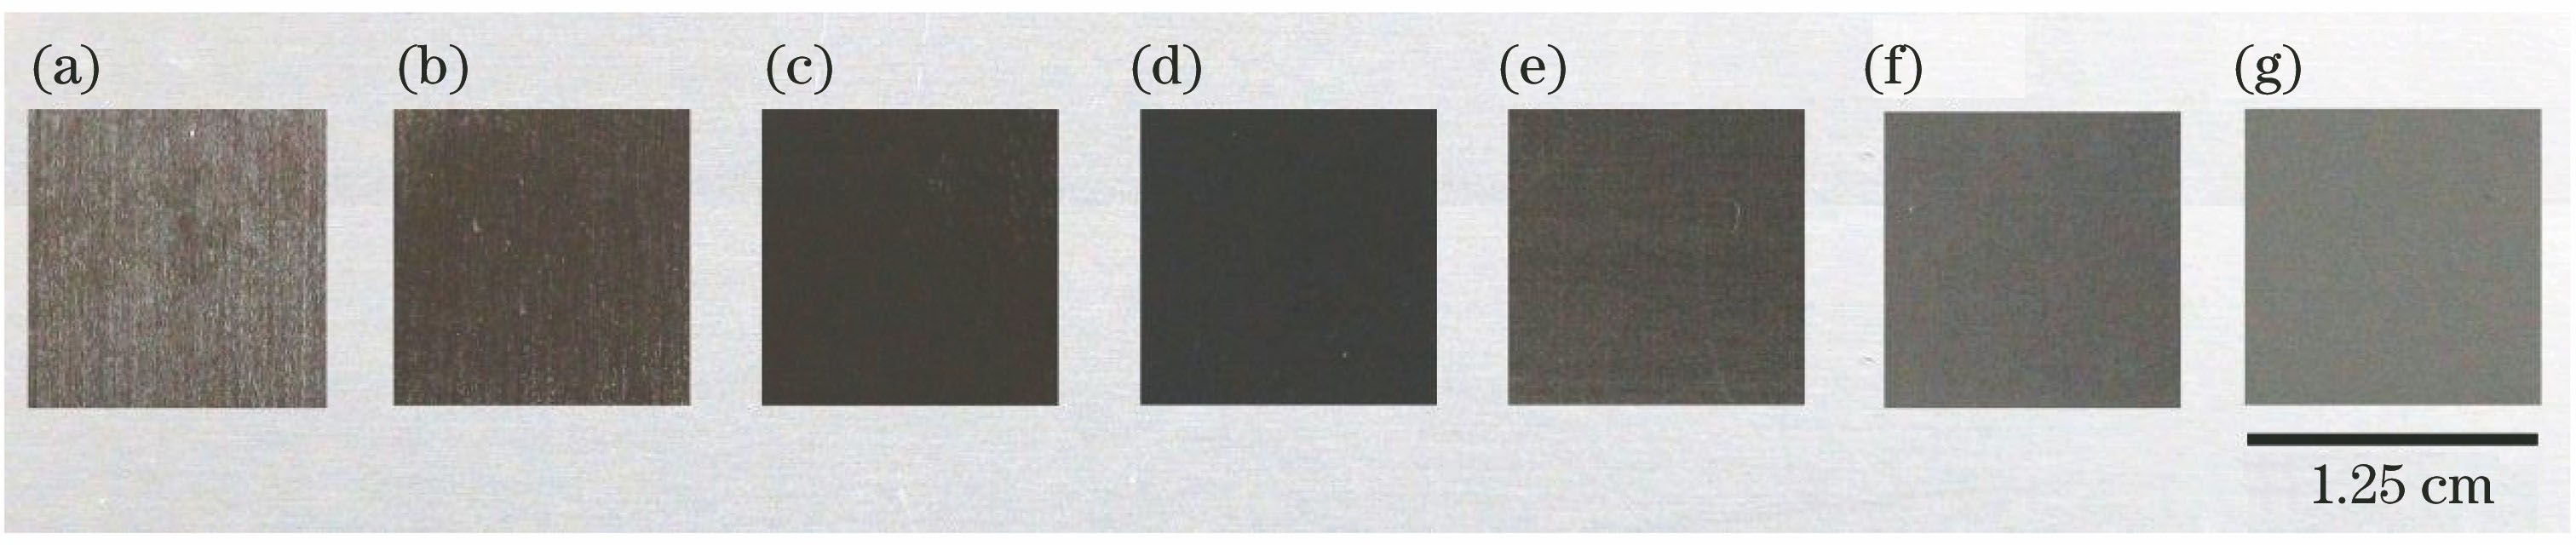 Macroscopic displays on surface of 5052 anodic aluminum oxide alloy after laser surface processing with different setup powers. (a) 23%P0; (b) 25%P0; (c) 27%P0; (d) 33%P0; (e) 38%P0; (f) 40%P0; (g) 50%P0